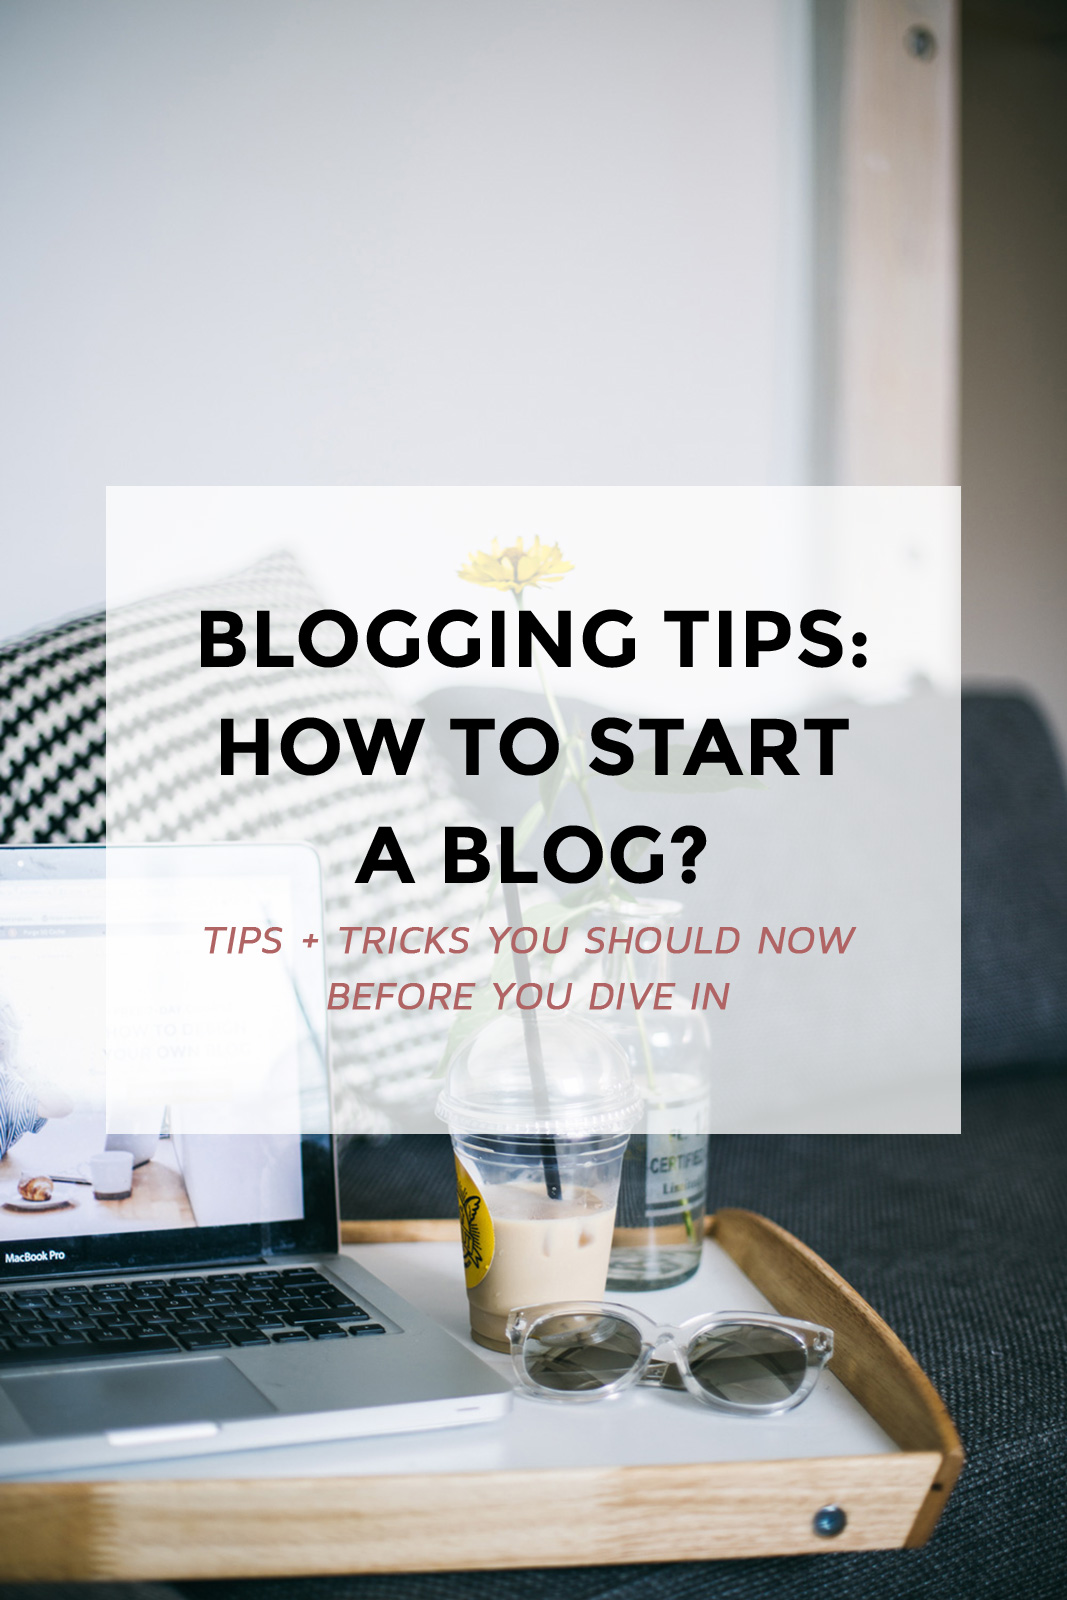 if you’re reading this you might be thinking about starting a blog? Great news! I collected some of the tips & tricks I wish someone would have told me about before I started. You will learn many things through your blogging journey, but here are some things you should now before you dive in! (blogging tips, tips for bloggers, starting a blog, start a blog, blog tutorials)